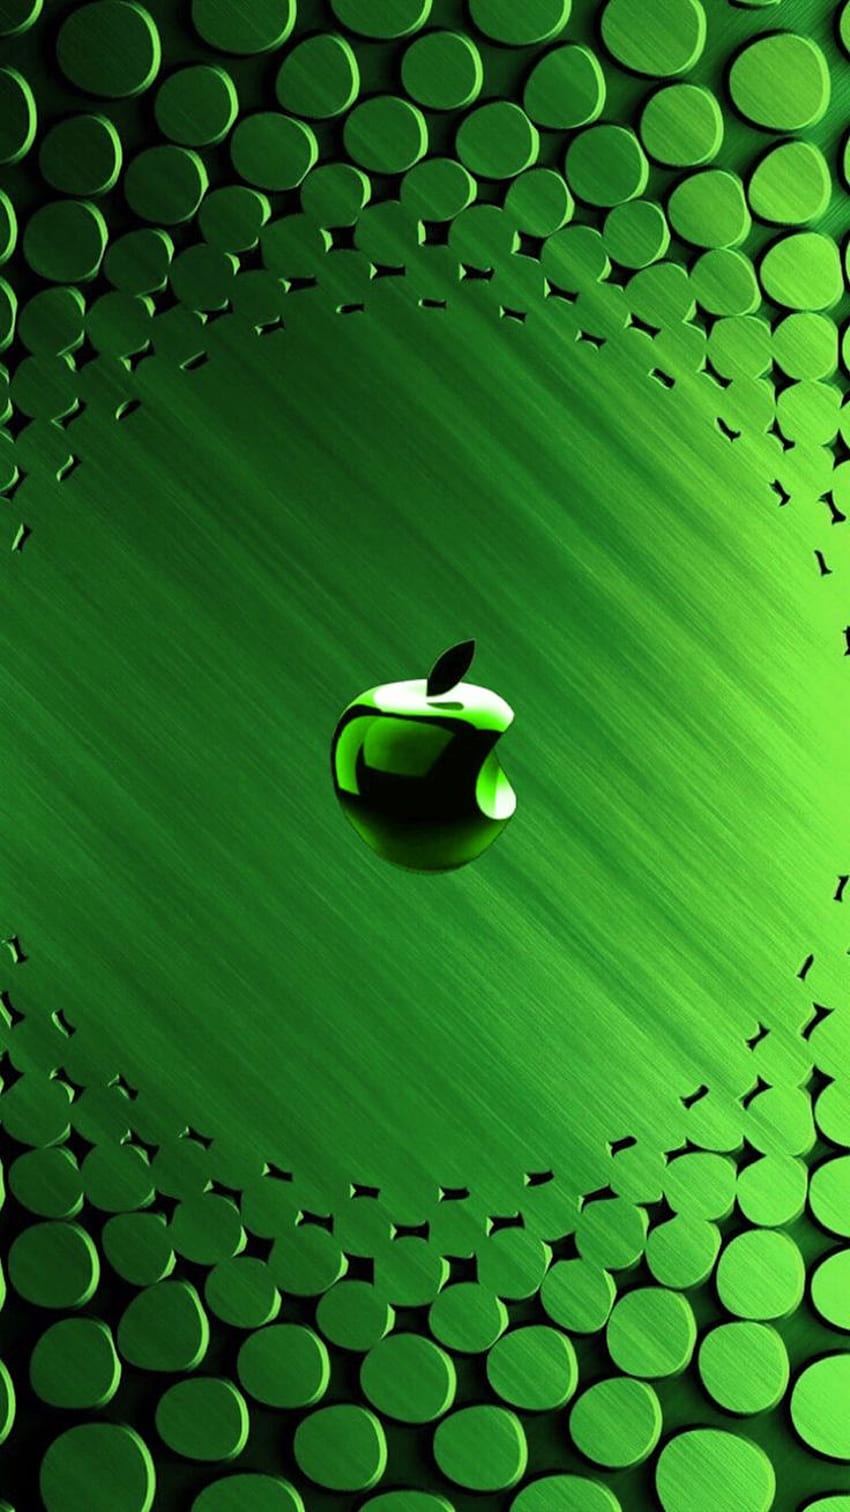 Green Apple Photos Download The BEST Free Green Apple Stock Photos  HD  Images